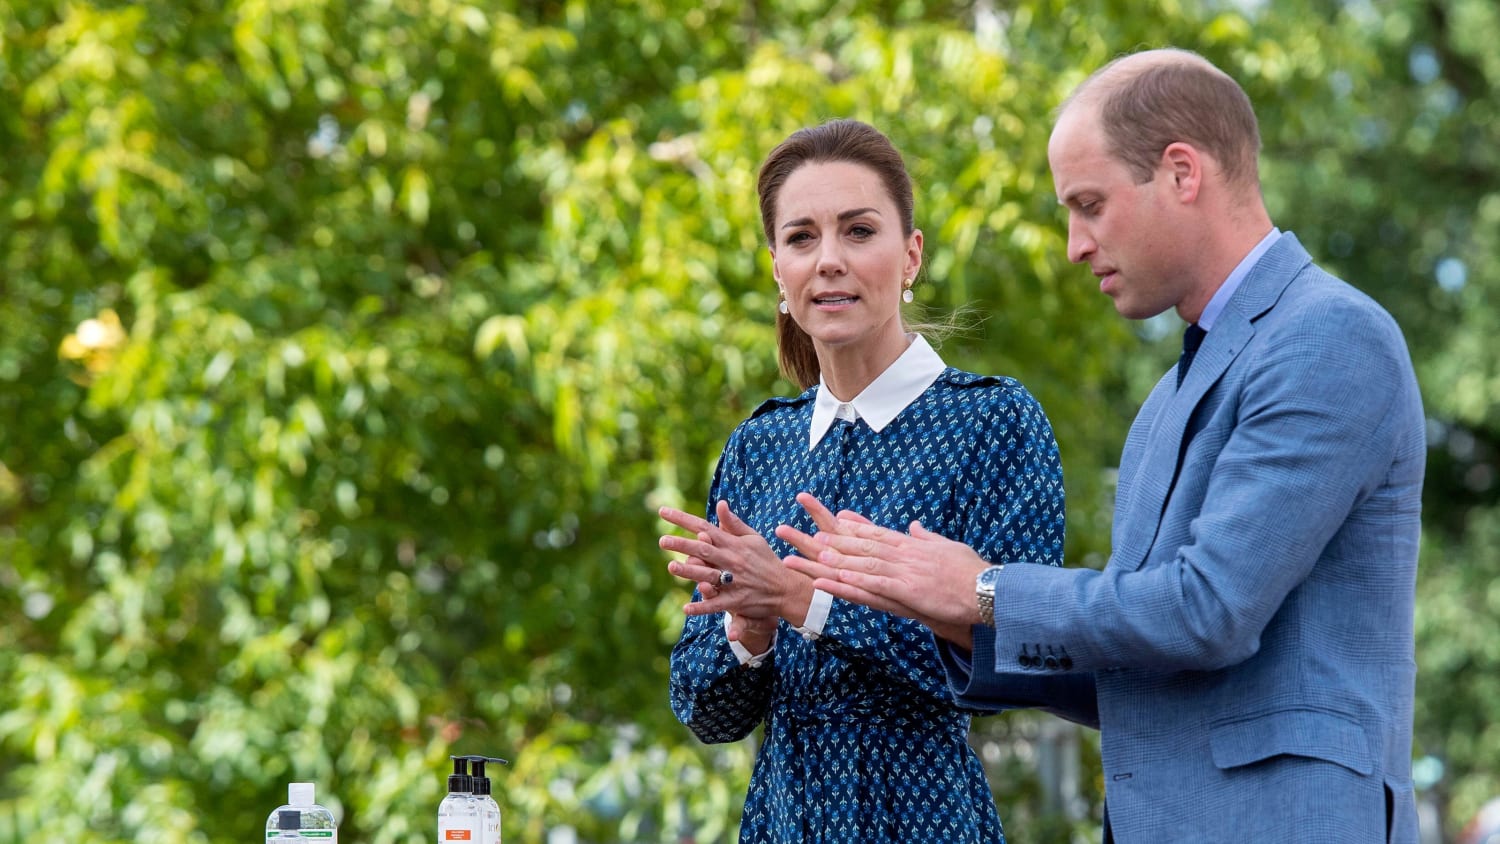 Prince William, Duchess Kate keep hands clean honoring health care workers for COVID response